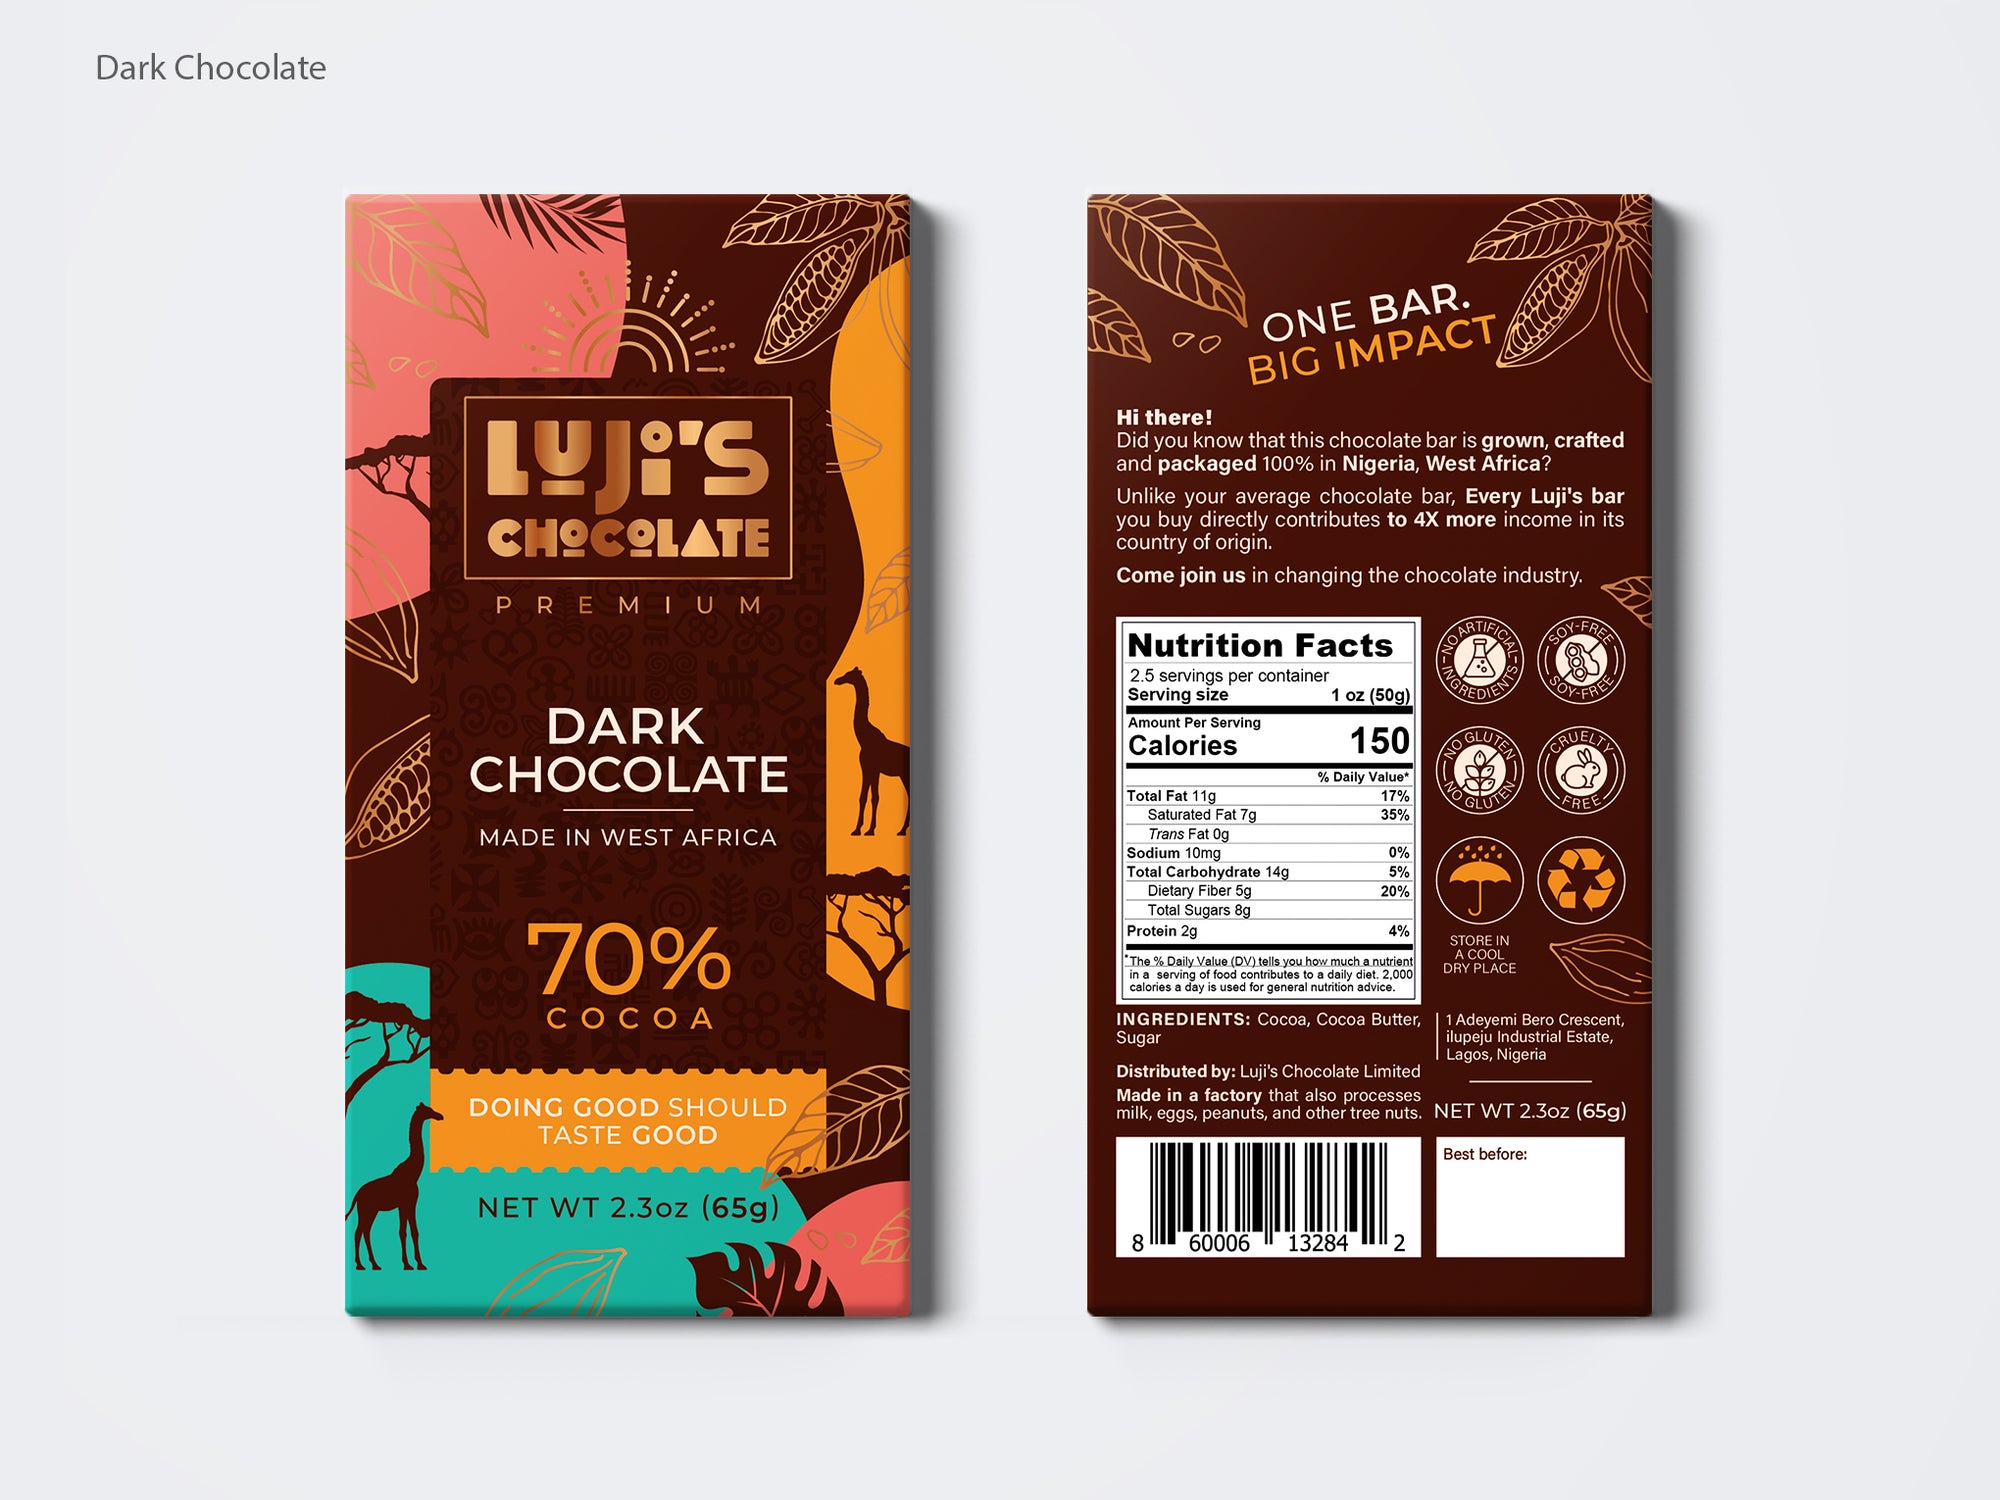 Front and back view of Luji's Dark Chocolate bar packaging with a rich brown and teal design featuring a giraffe silhouette and cocoa pod illustrations, highlighting '70% Cocoa' and the slogan 'Doing Good Should Taste Good' on the front, alongside nutritional facts , ingredients and company address on the back.